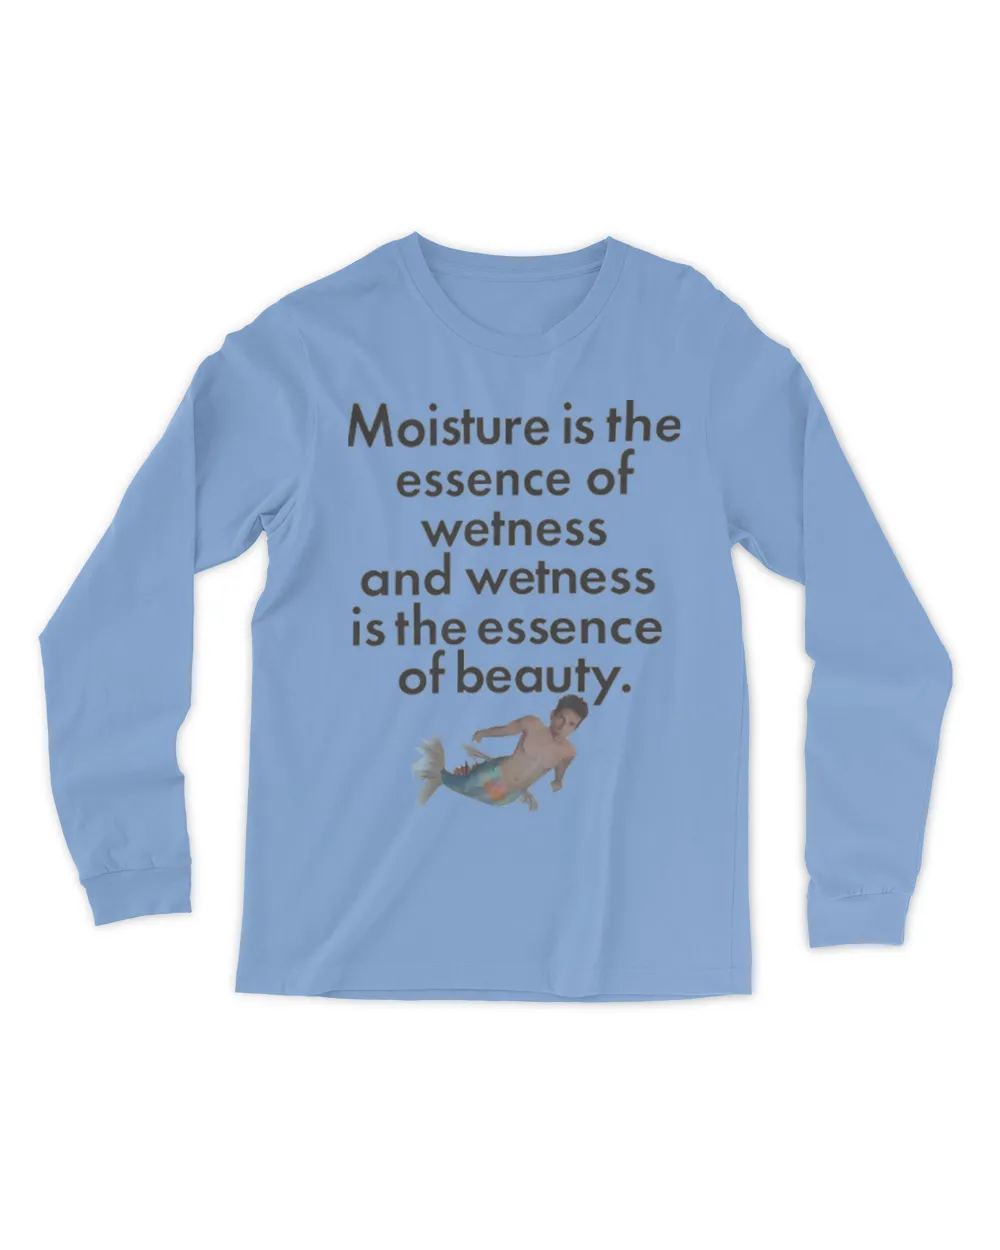 Moisture is the essence of wetness and wetness is the essence of beauty fish shirt